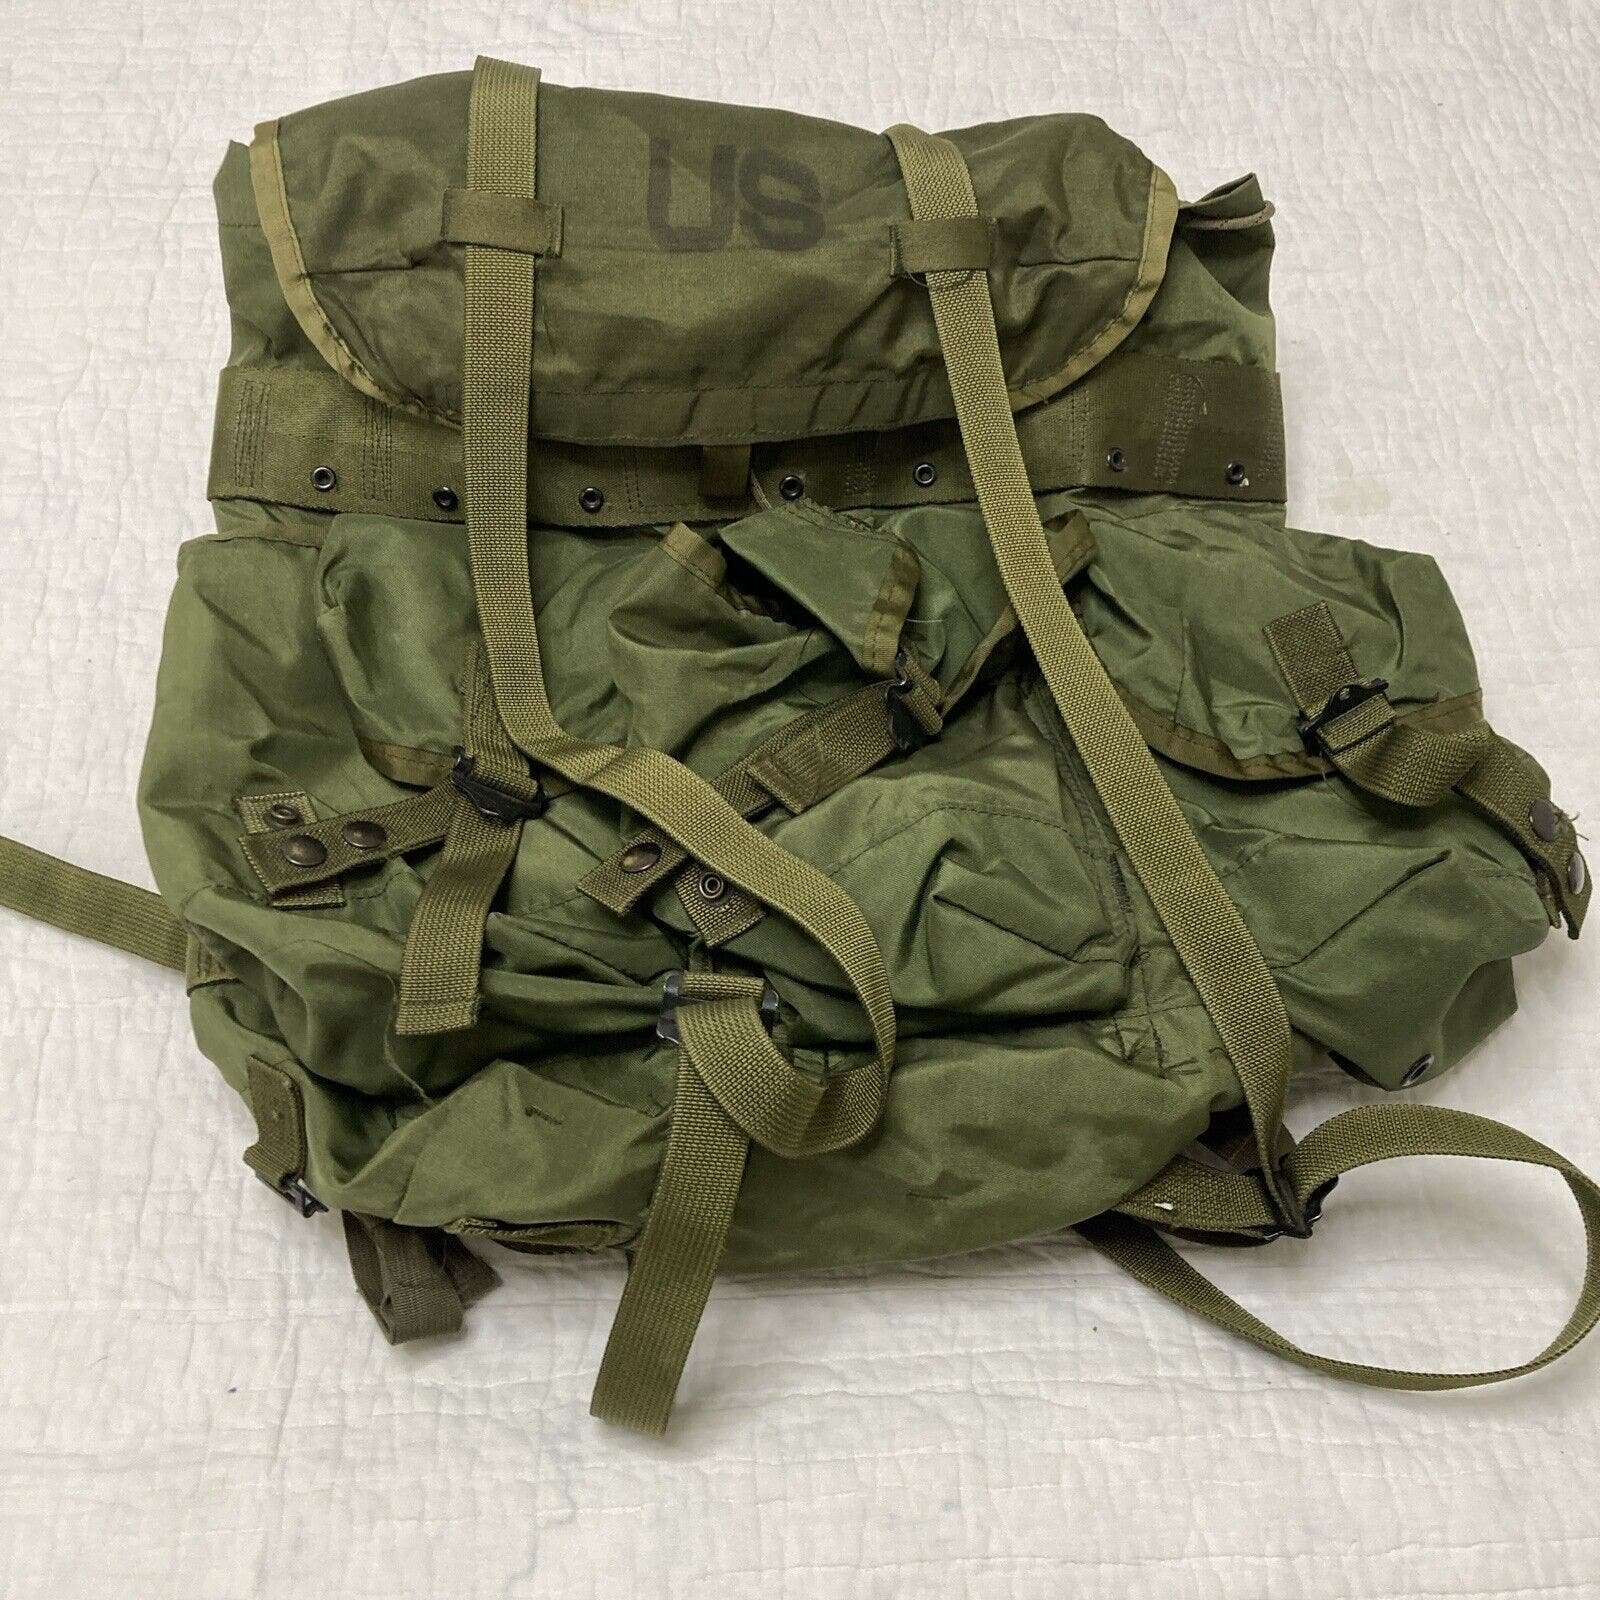 US Military Army Alice LC1 Nylon OD Green Backpack Combat Field Pack Medium G4jMkubRd